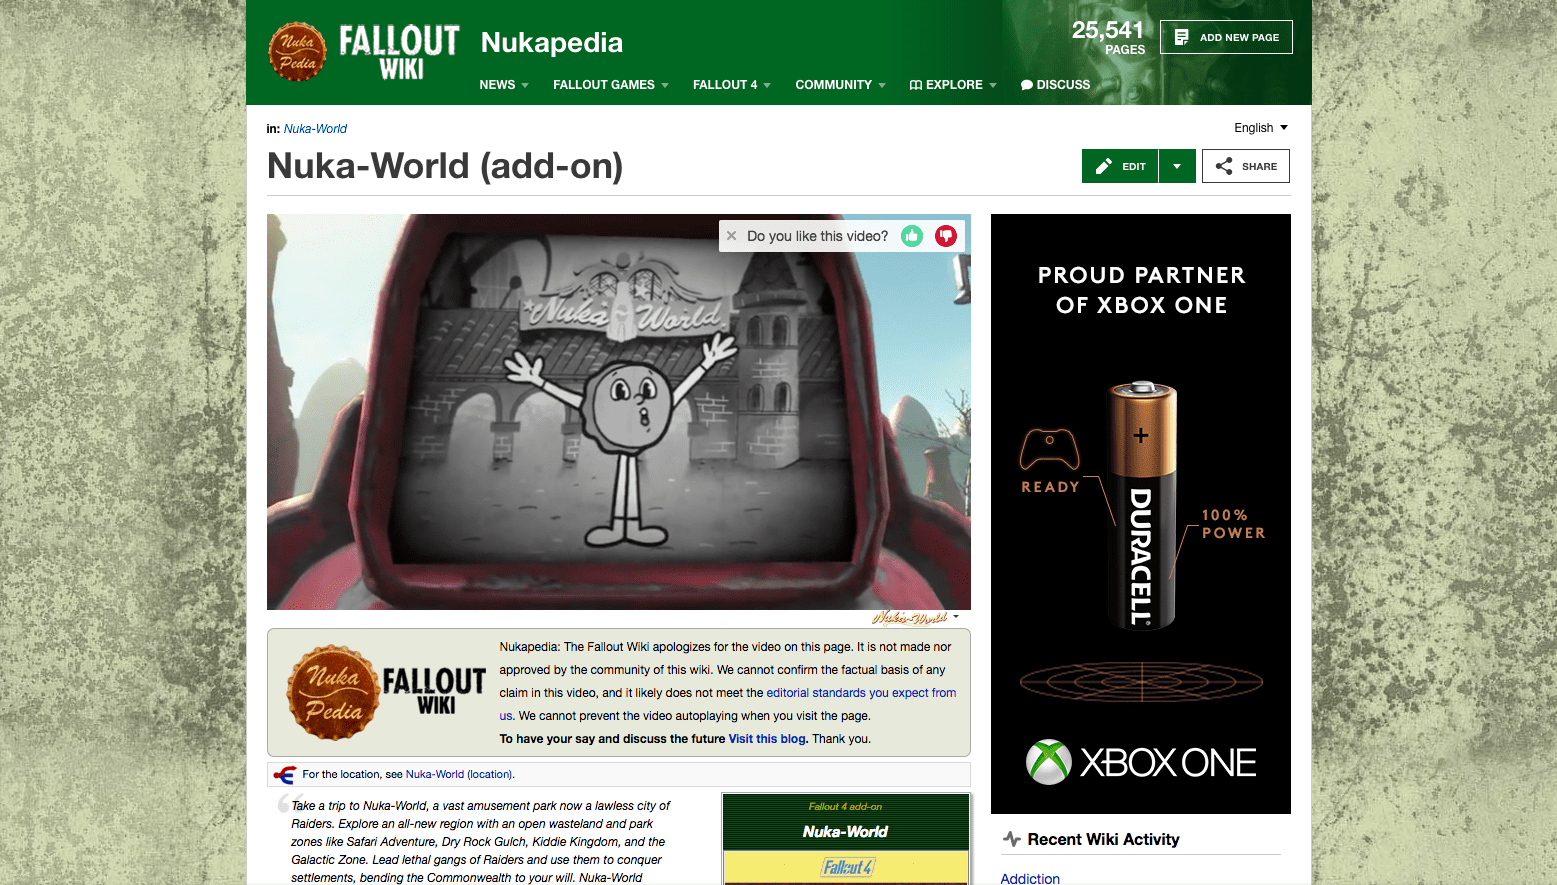 Fallout Fans Continue To Struggle With The Company That Hosts Their Wiki